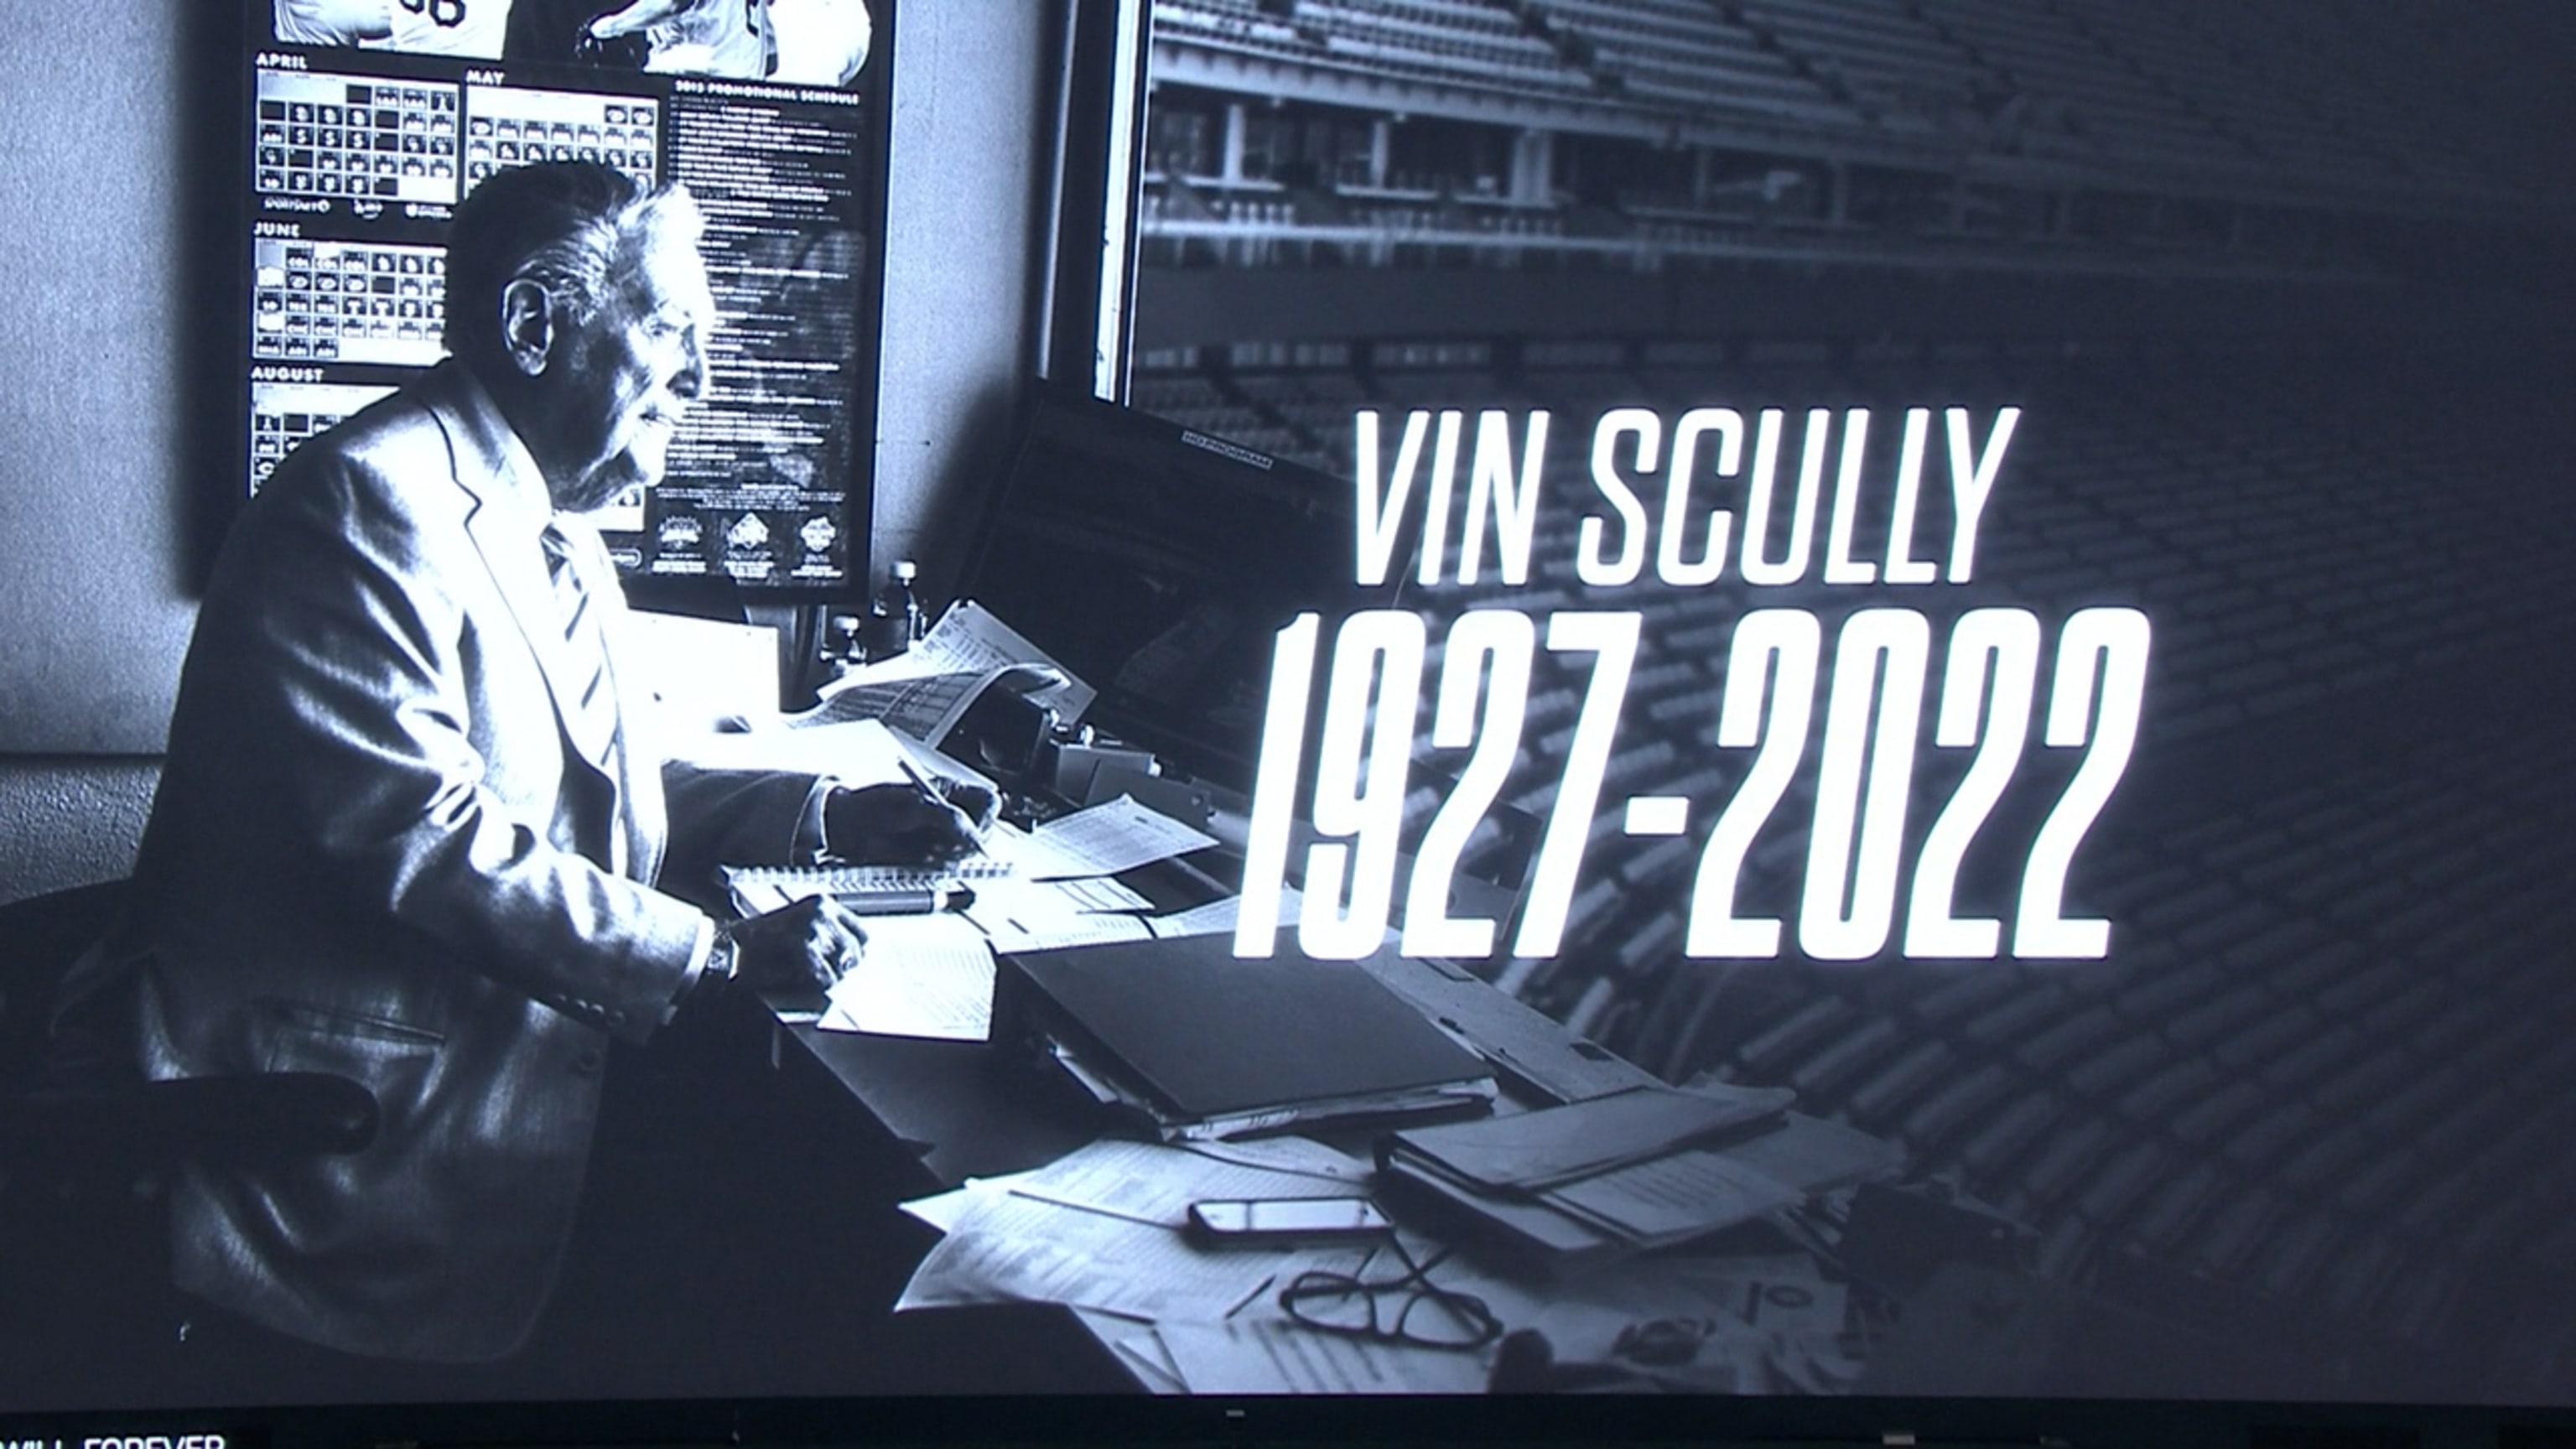 LA Dodgers Vin Scully Forever The Voice Of Dodgers 1927-2022